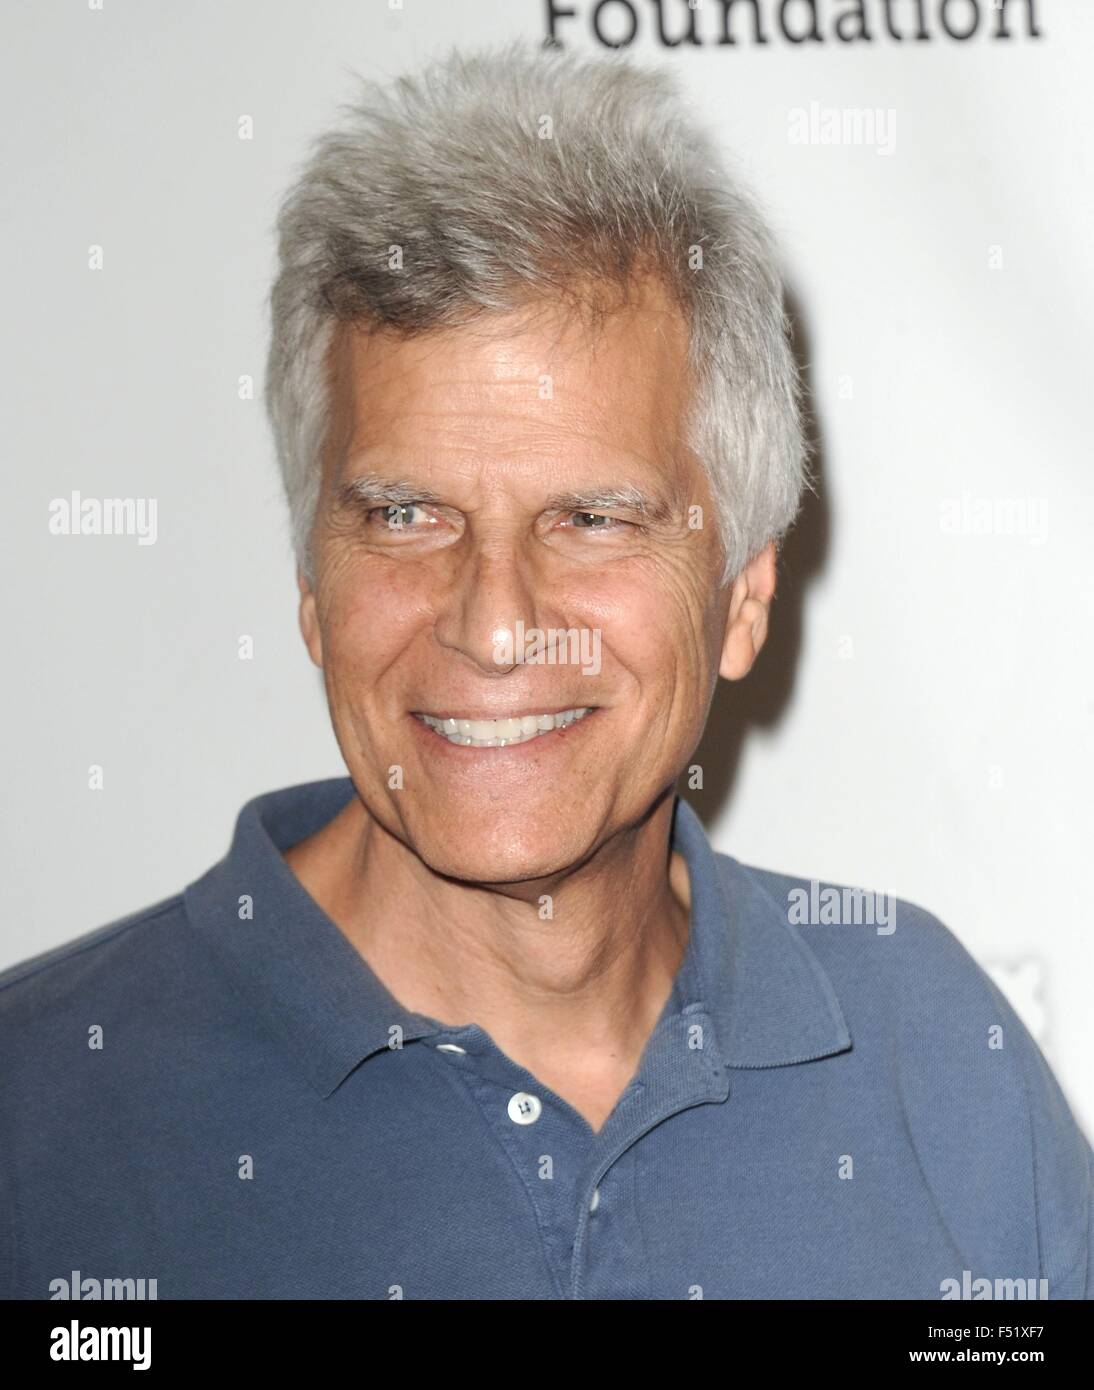 Culver City, CA. 25th Oct, 2015. Mark Spitz at arrivals for Elizabeth Glaser Pediatric AIDS Foundation's 26th Annual A Time For Heroes Family Festival, Smashbox Studios, Culver City, CA October 25, 2015. Credit:  Dee Cercone/Everett Collection/Alamy Live News Stock Photo